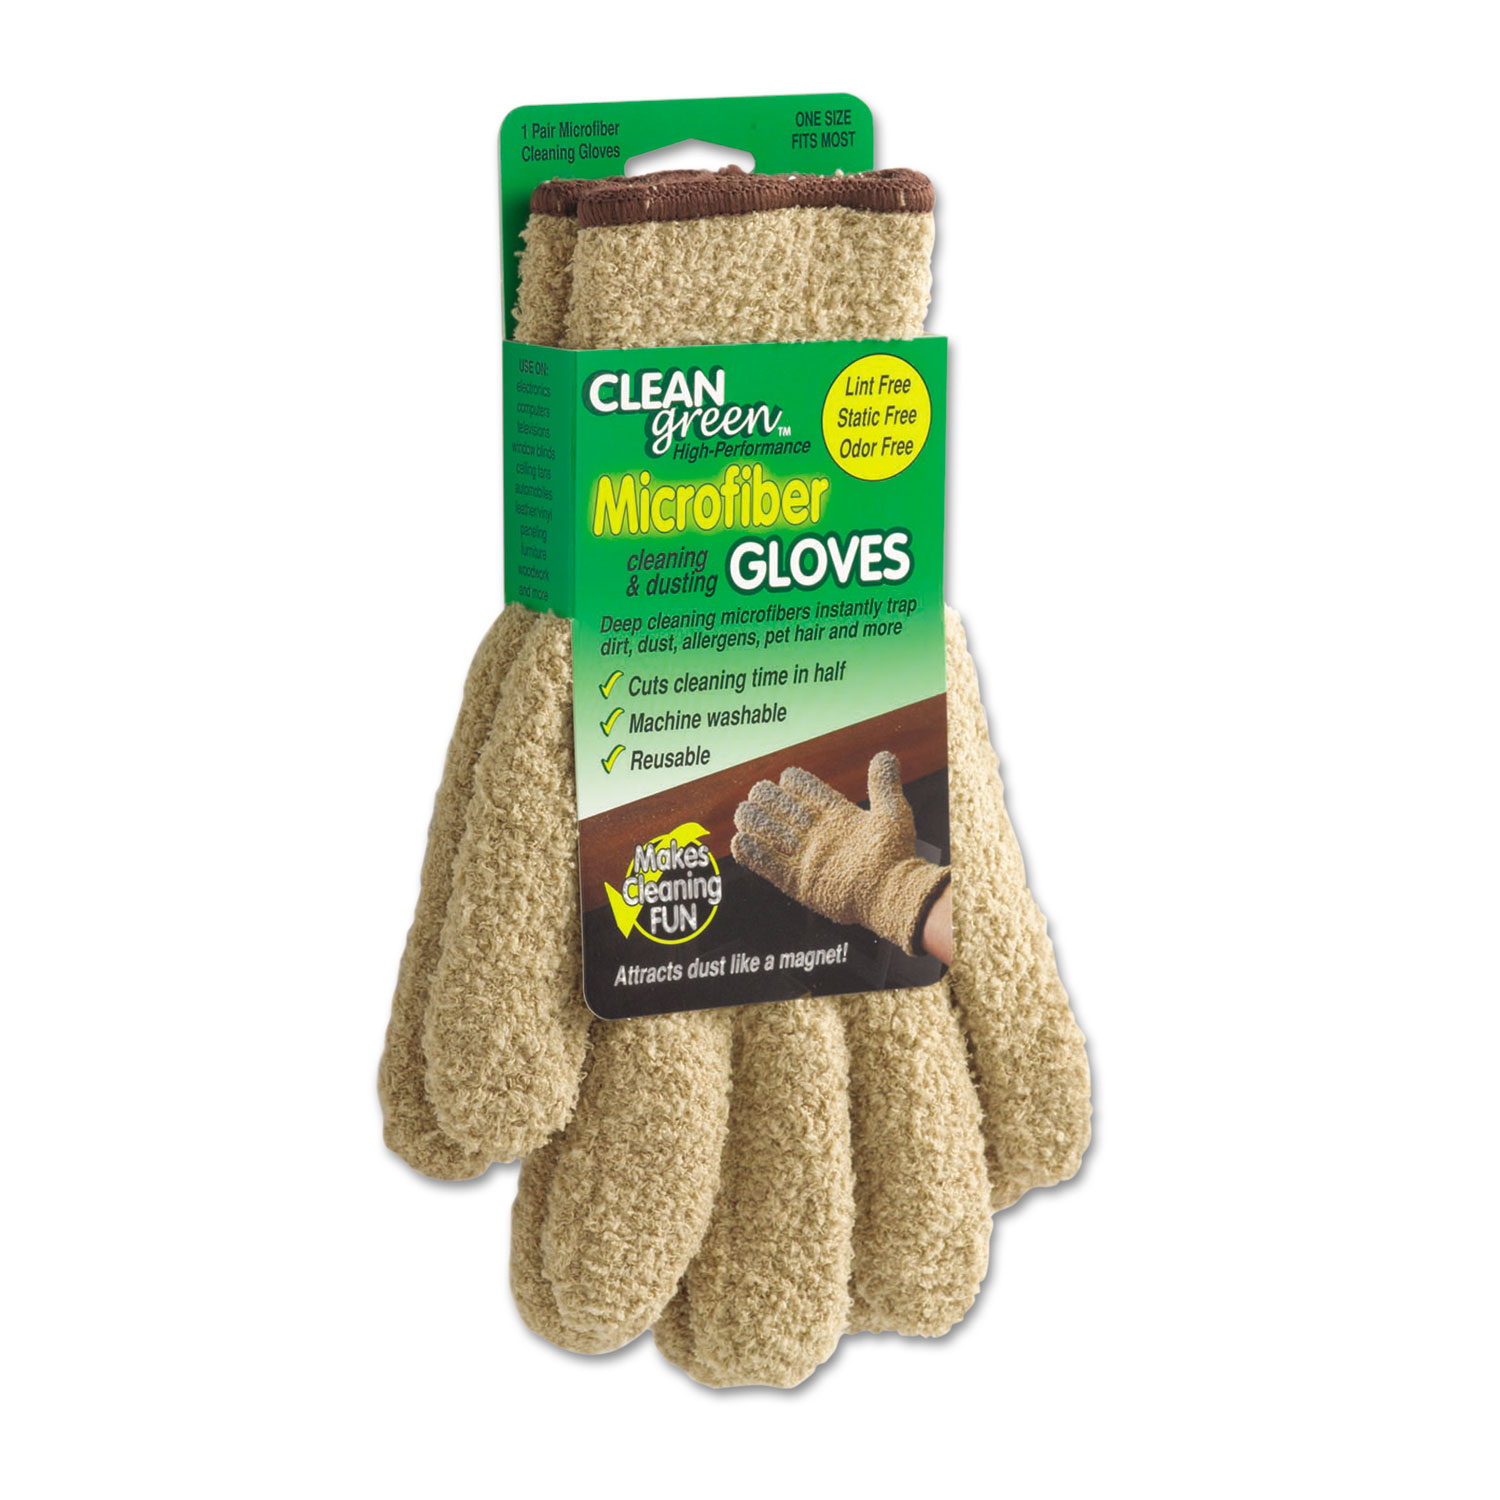  Master Caster 18040 CleanGreen Microfiber Cleaning and Dusting Gloves, Pair (MAS18040) 